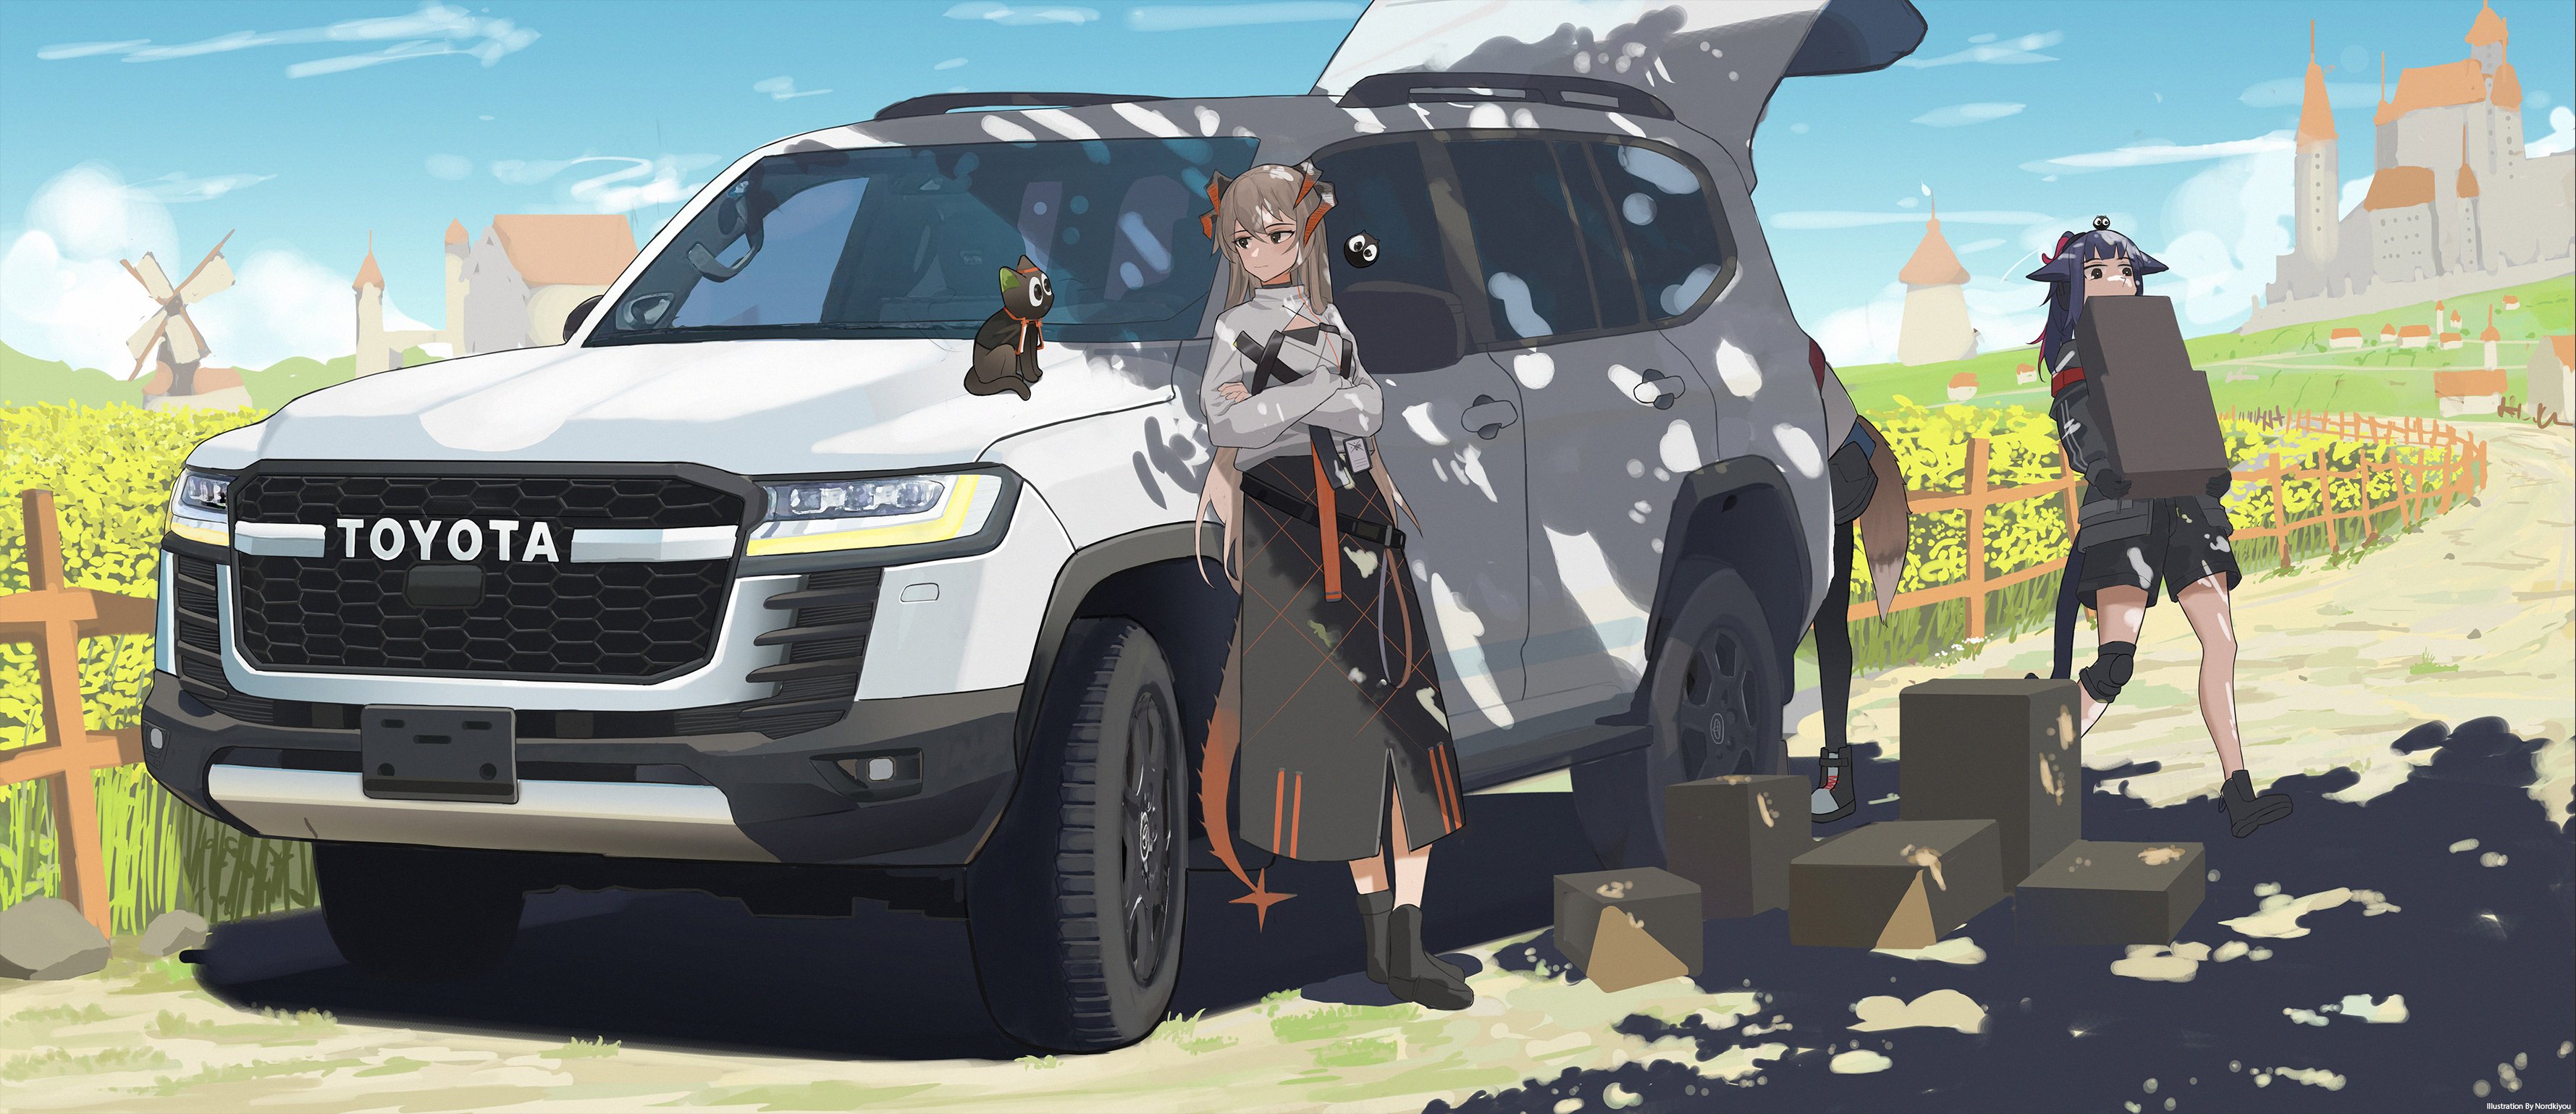 Anime 3558x1539 Arknights anime girls sunlight standing cats sky clouds frontal view long hair windmill Toyota saria (arknights) box Jessica(Arknights) vehicle watermarked